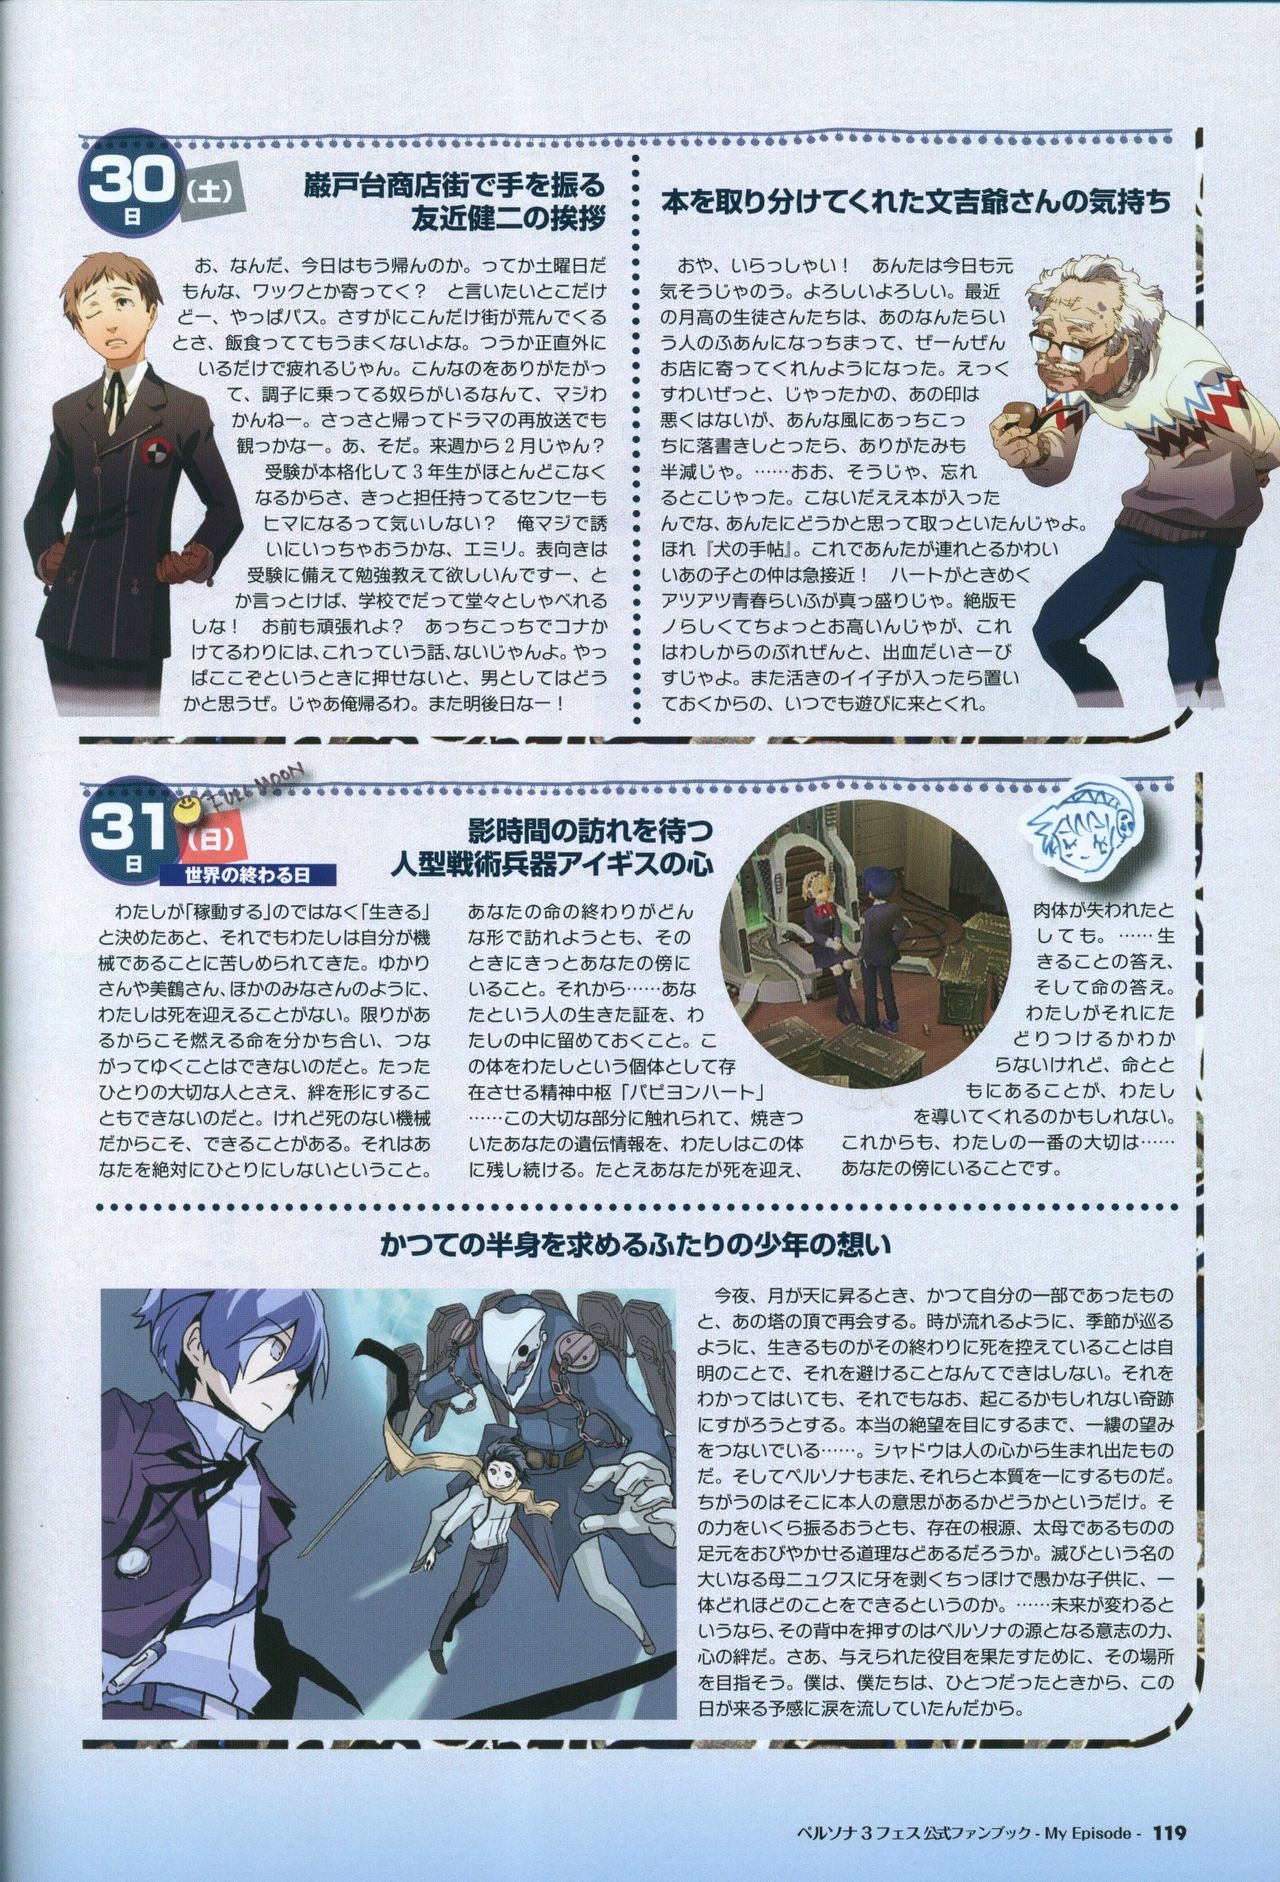 Persona 3 Fes Official Fan Book -My Episode- 120